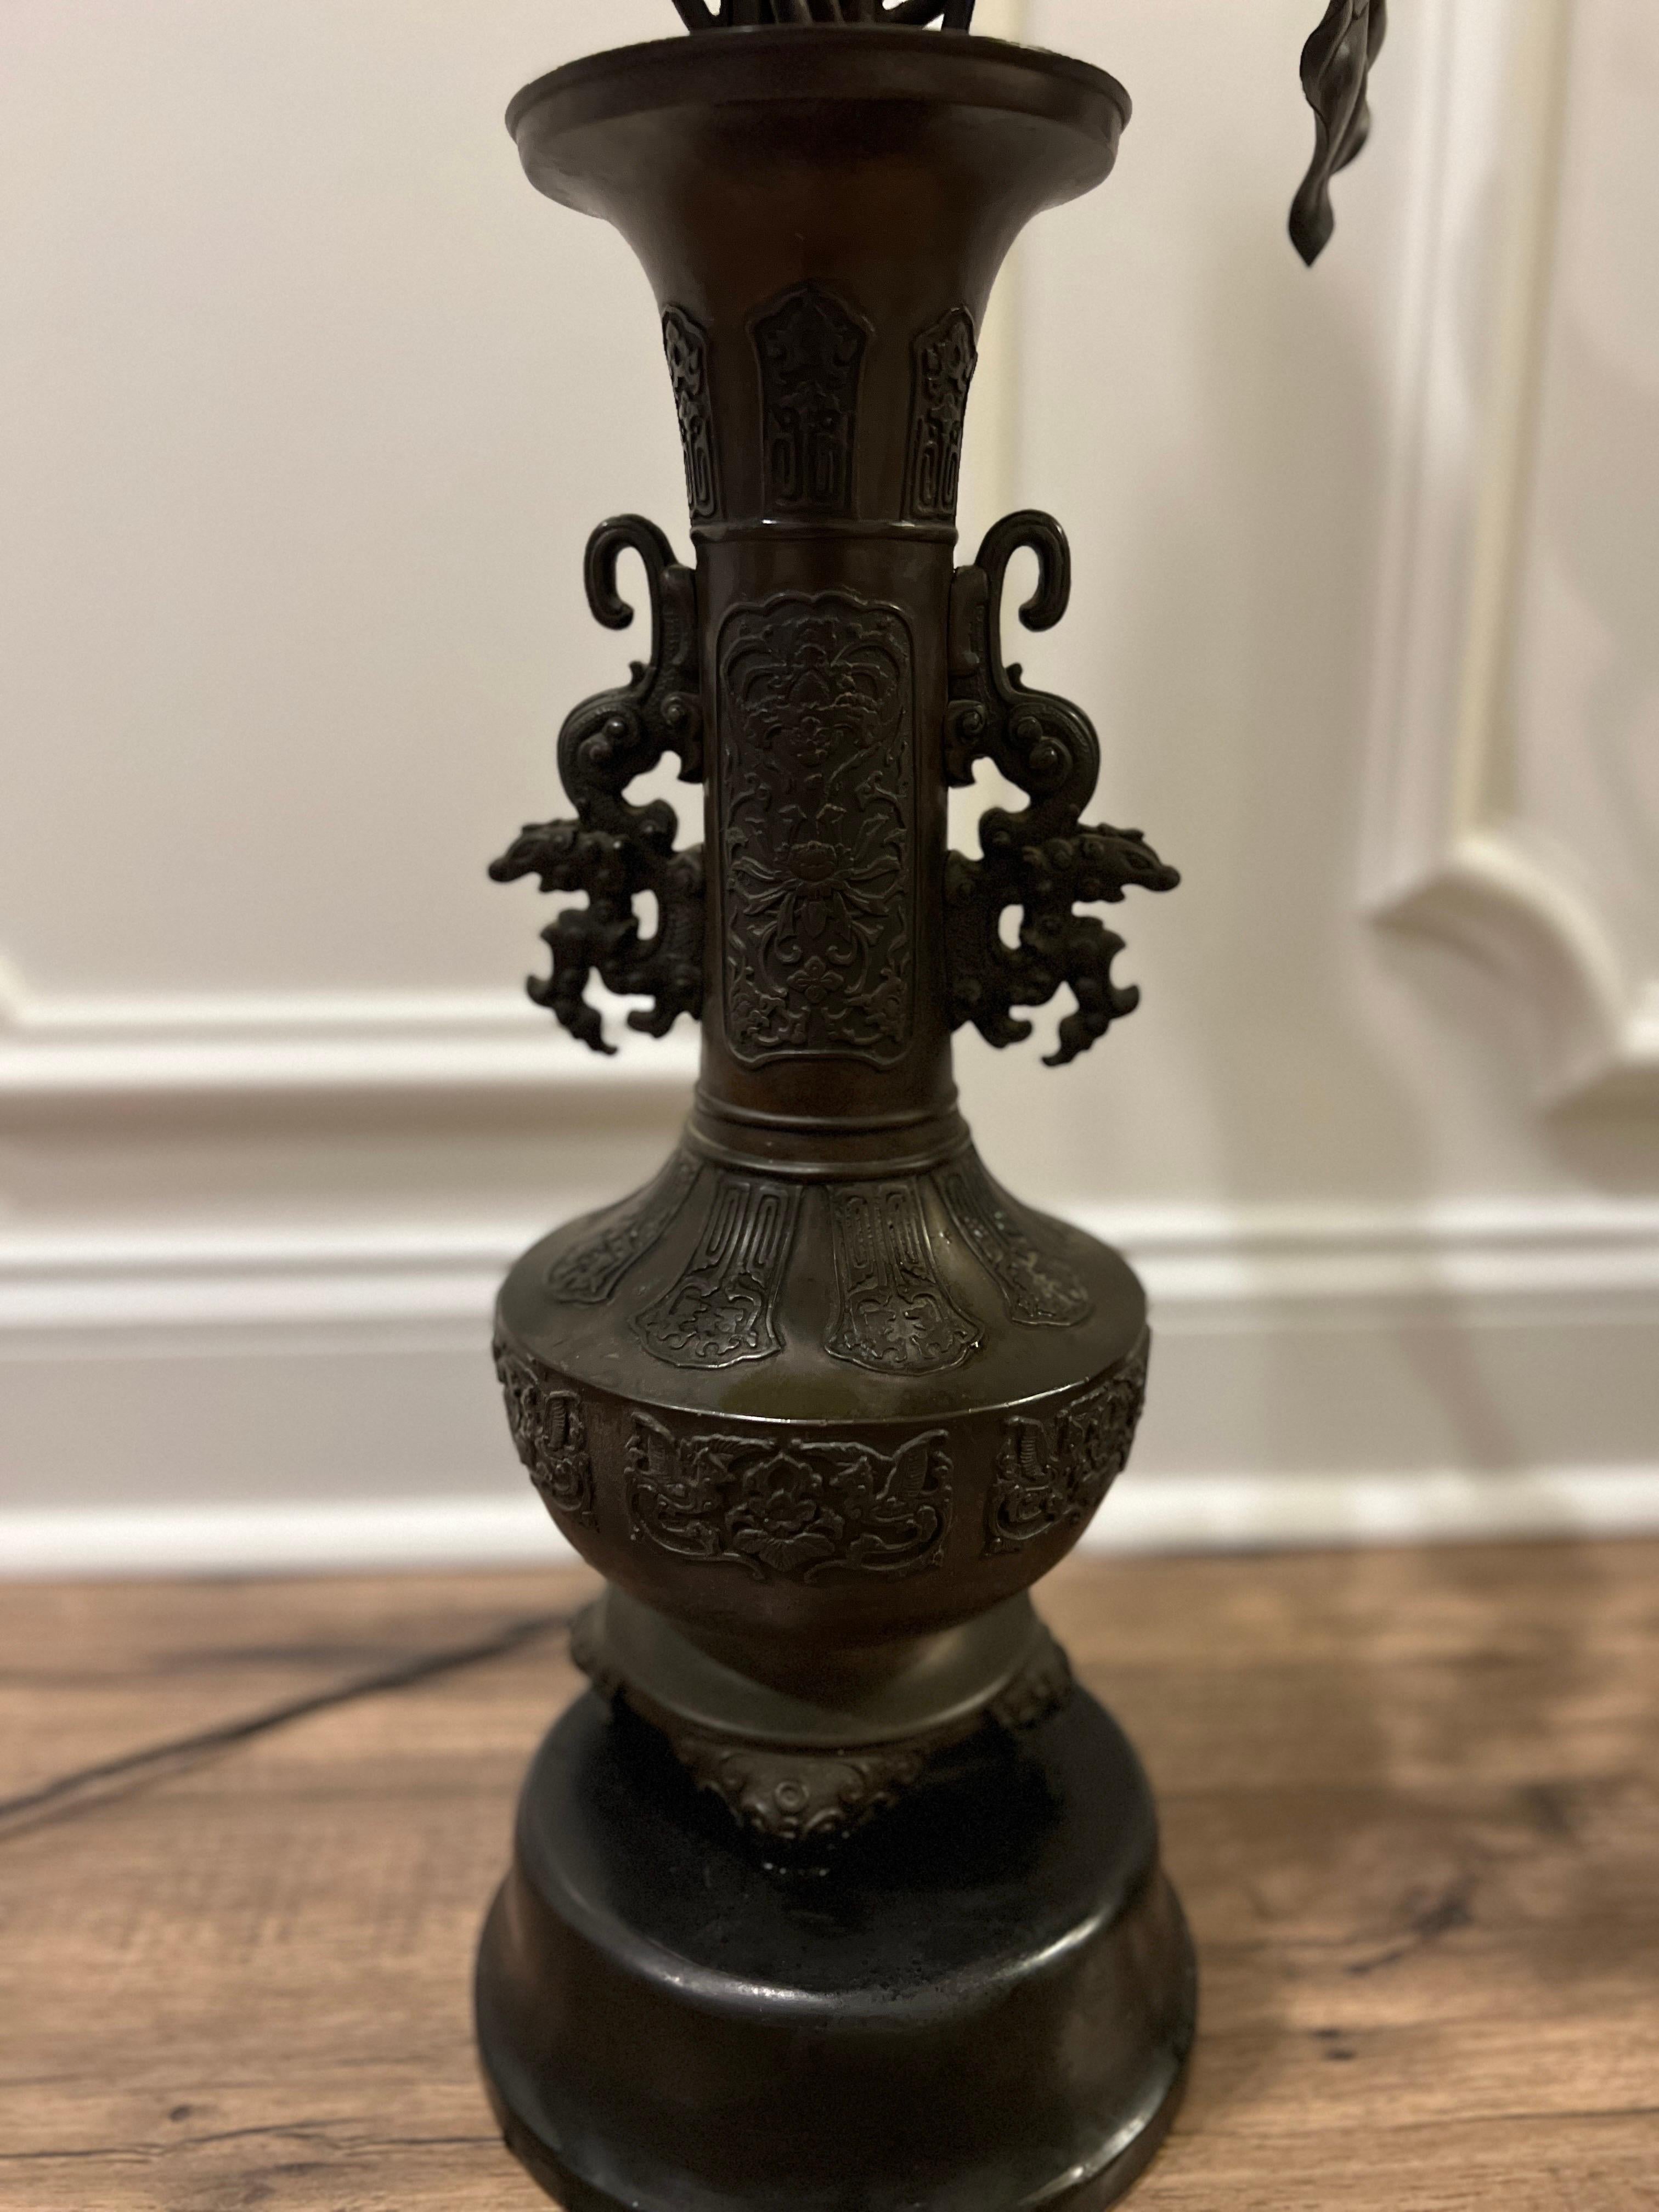 Aesthetic Movement Large Scale Meiji Japanese Bronze Table Lamp W/ Floral Candelabra Mounts For Sale